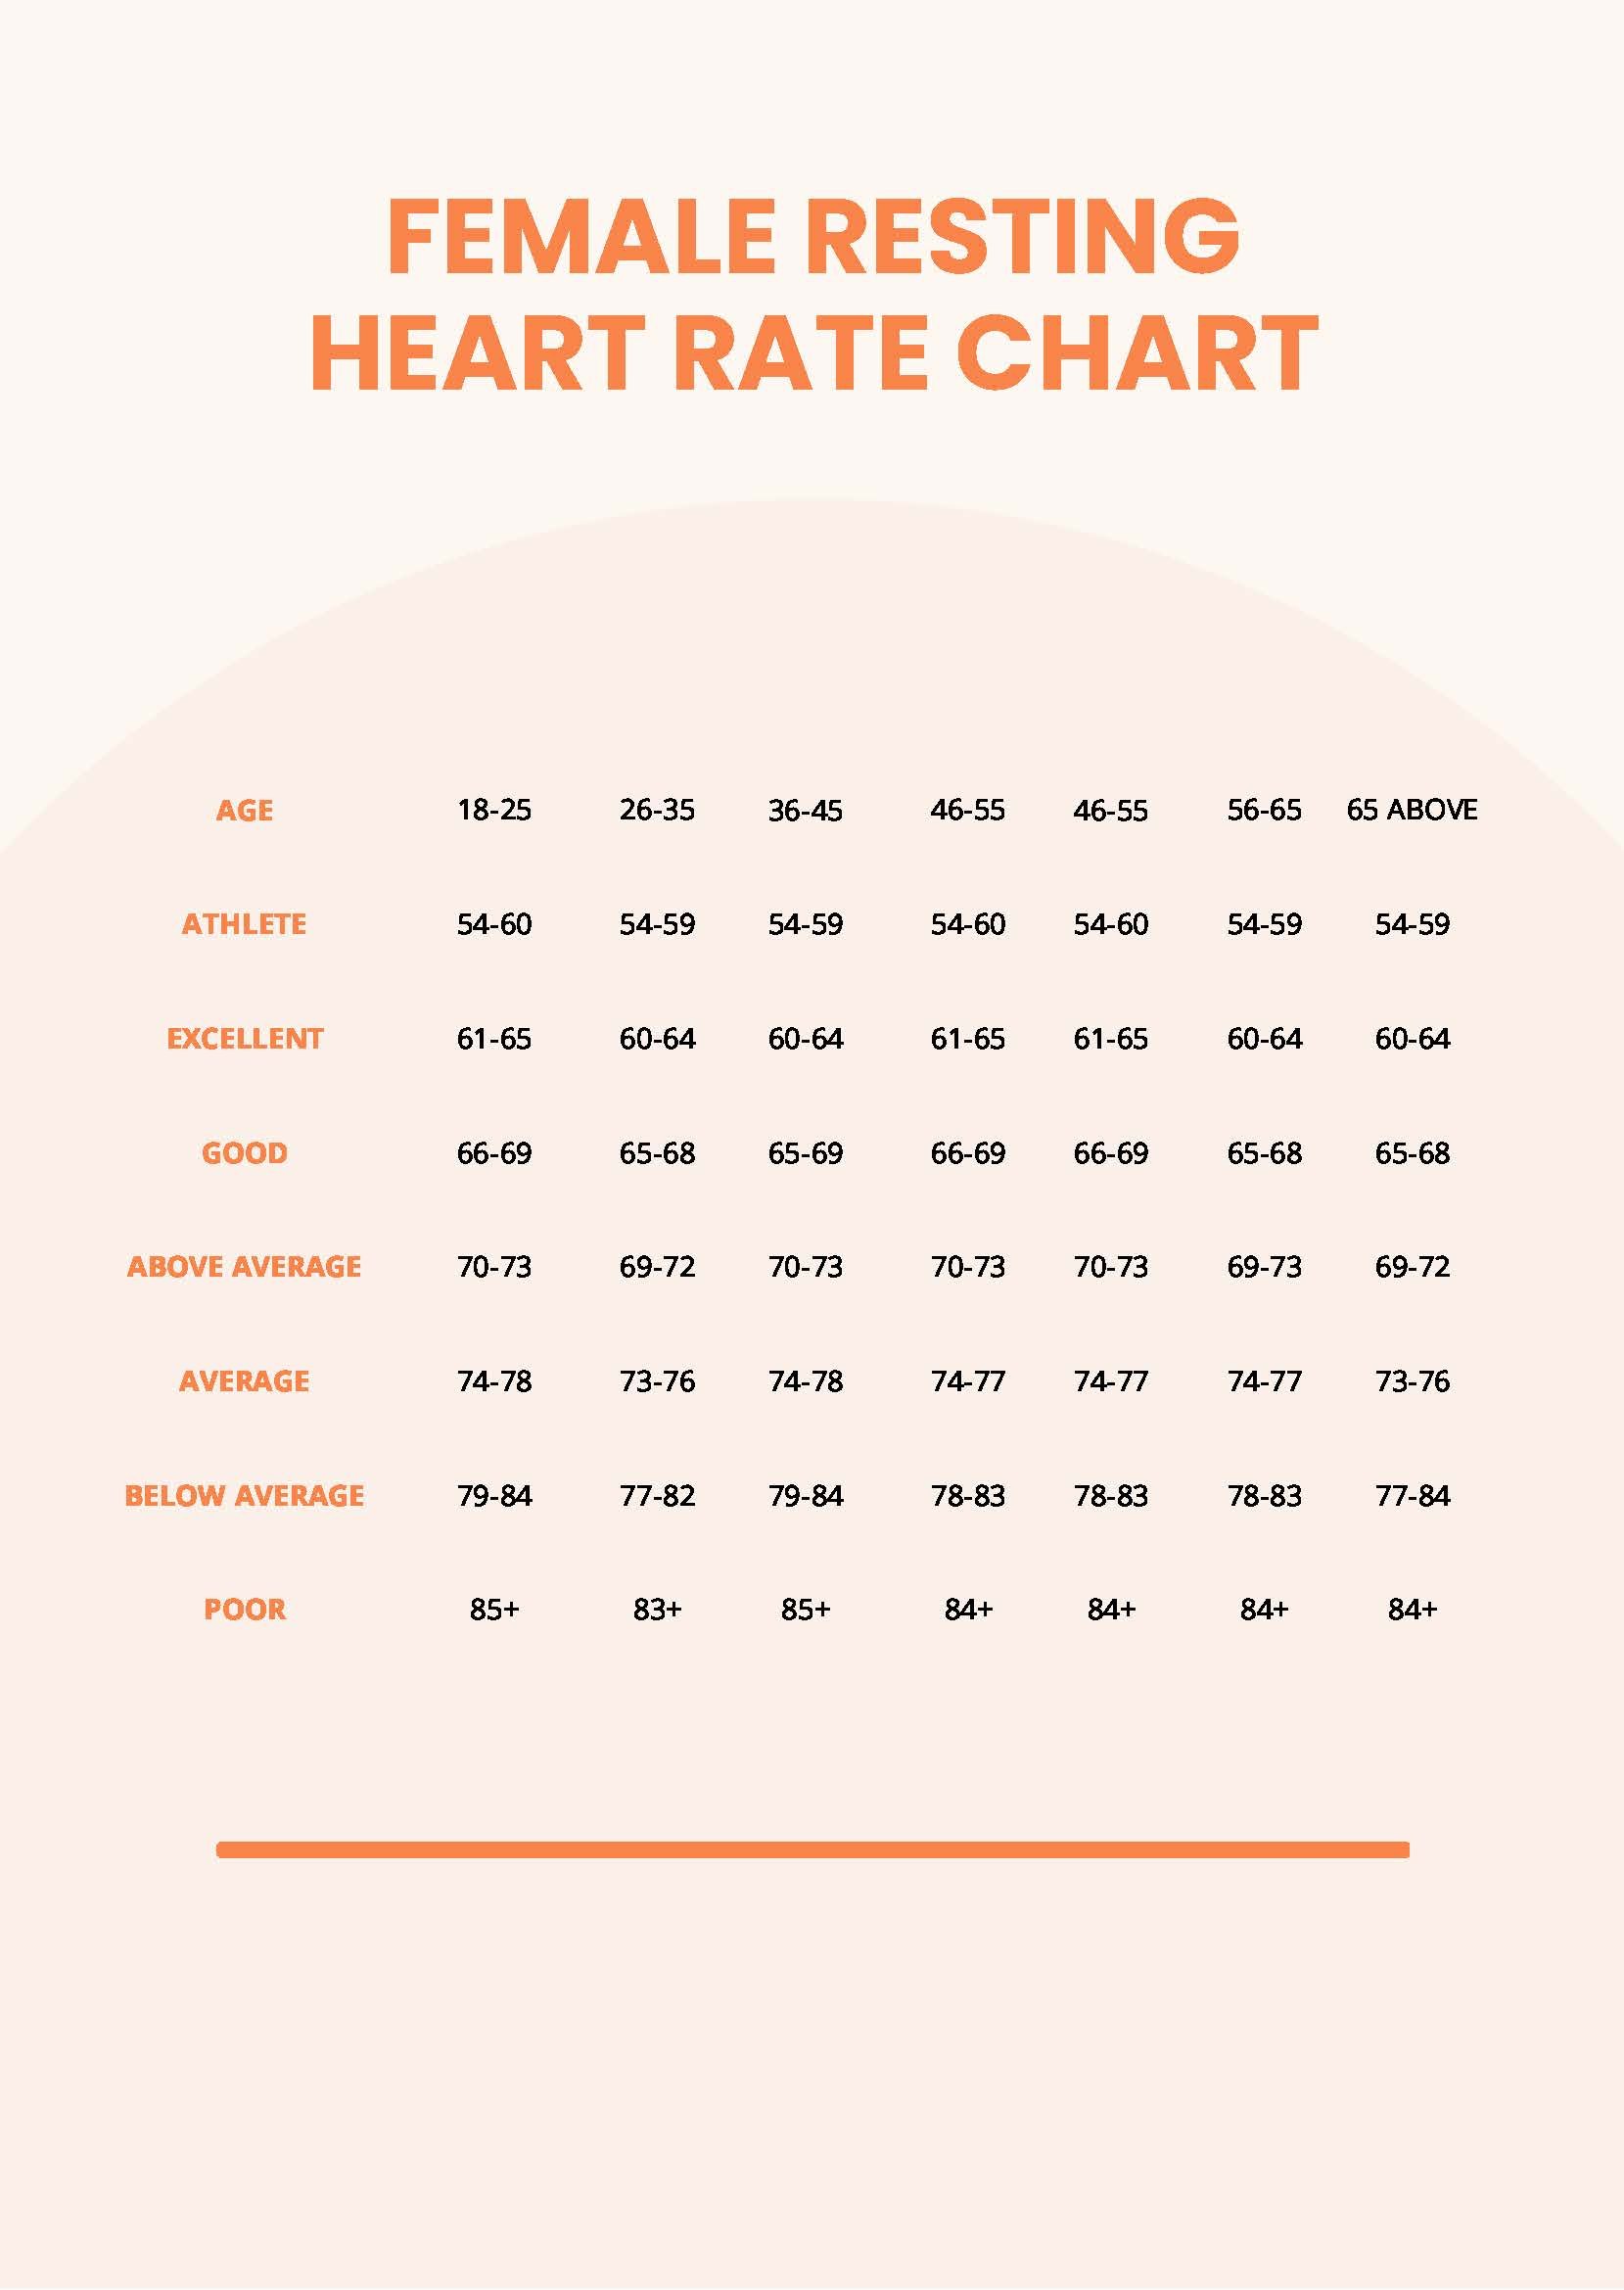 Free Female Resting Heart Rate Chart in PDF